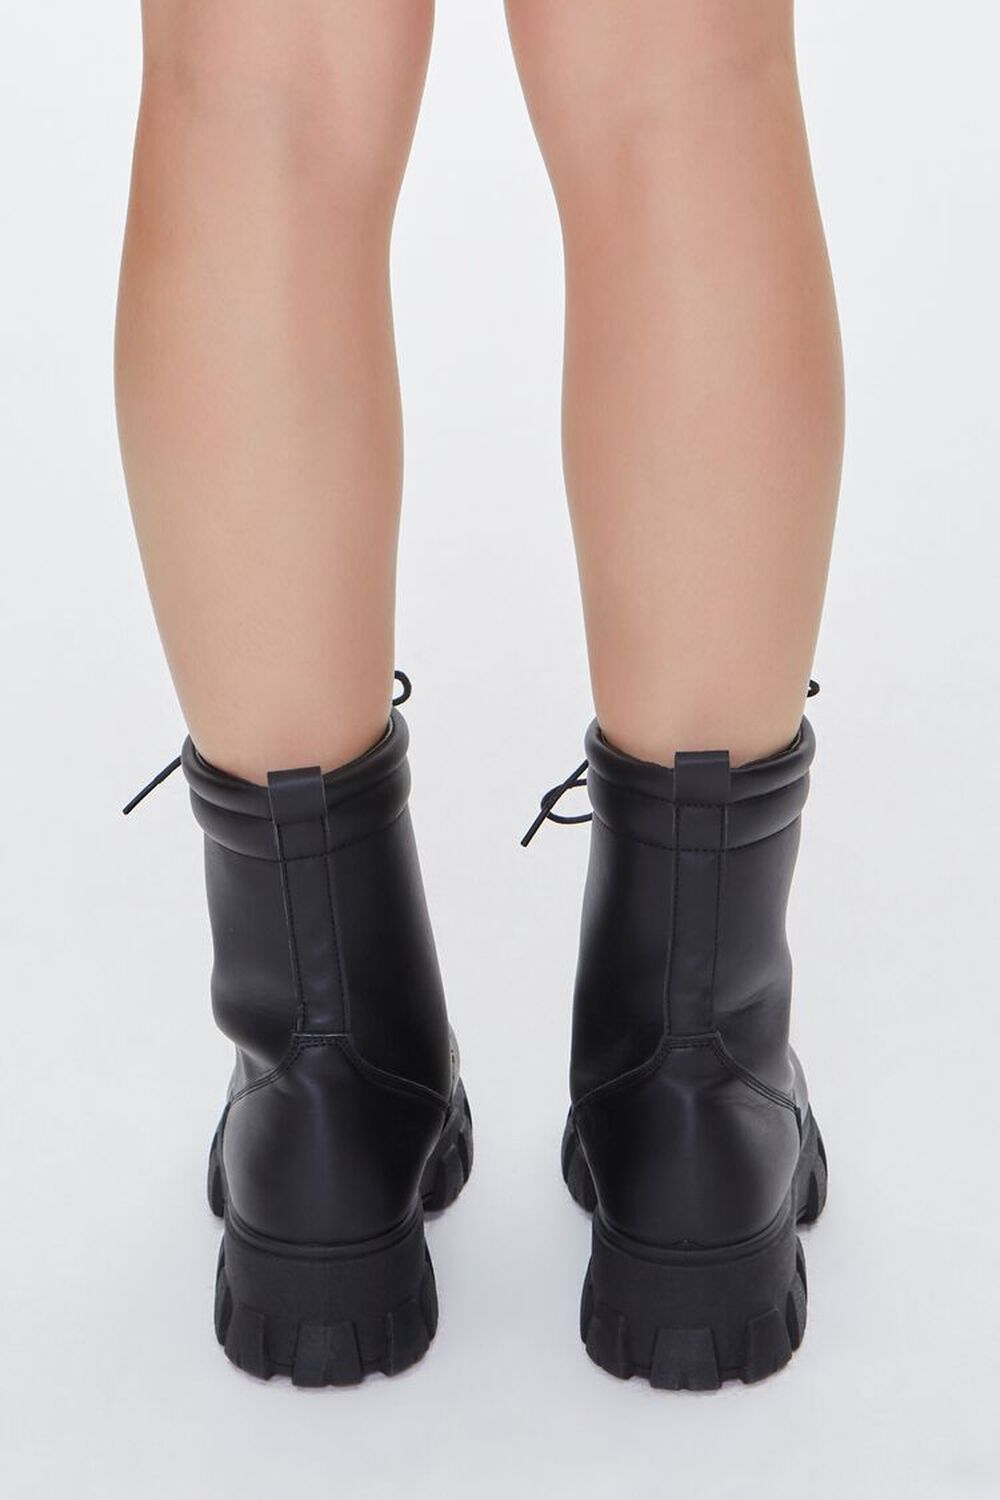 BLACK Faux Leather Lace-Up Chunky Booties, image 3